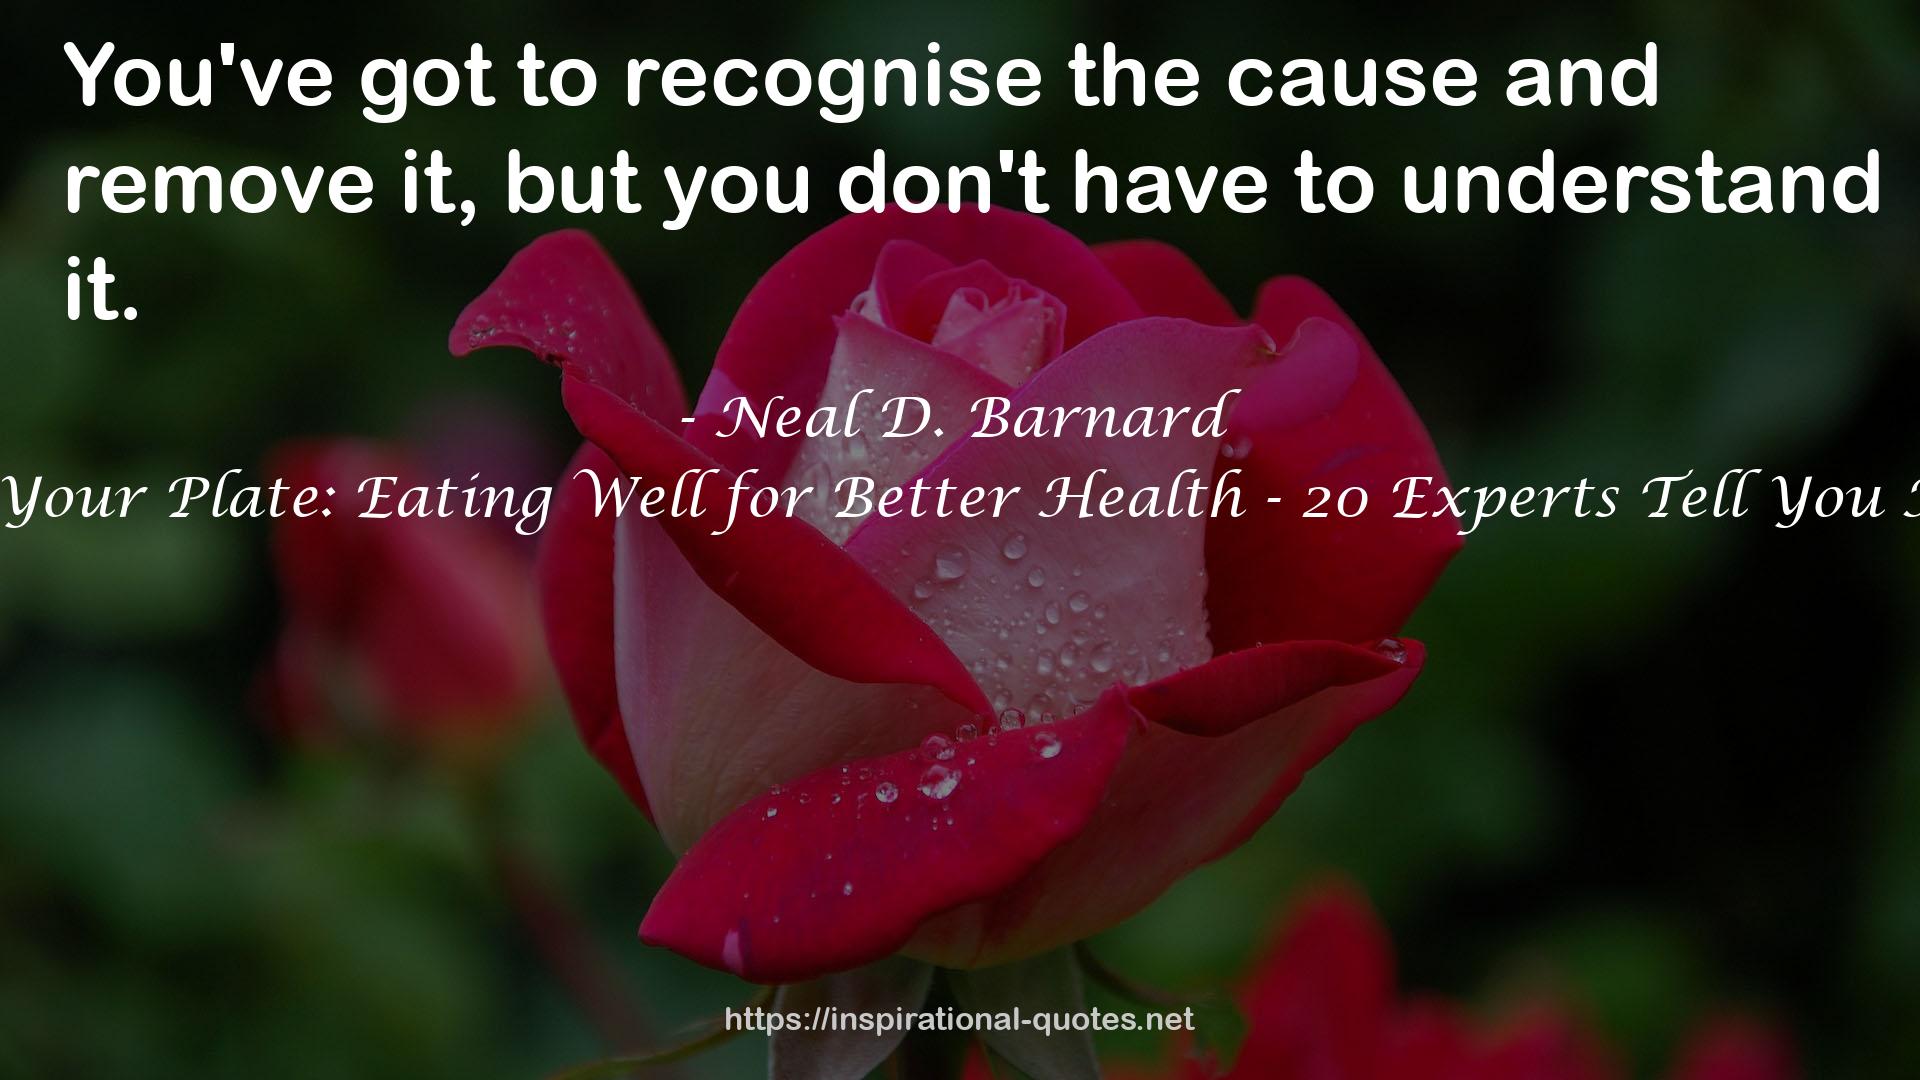 The Power of Your Plate: Eating Well for Better Health - 20 Experts Tell You How (Revised) QUOTES